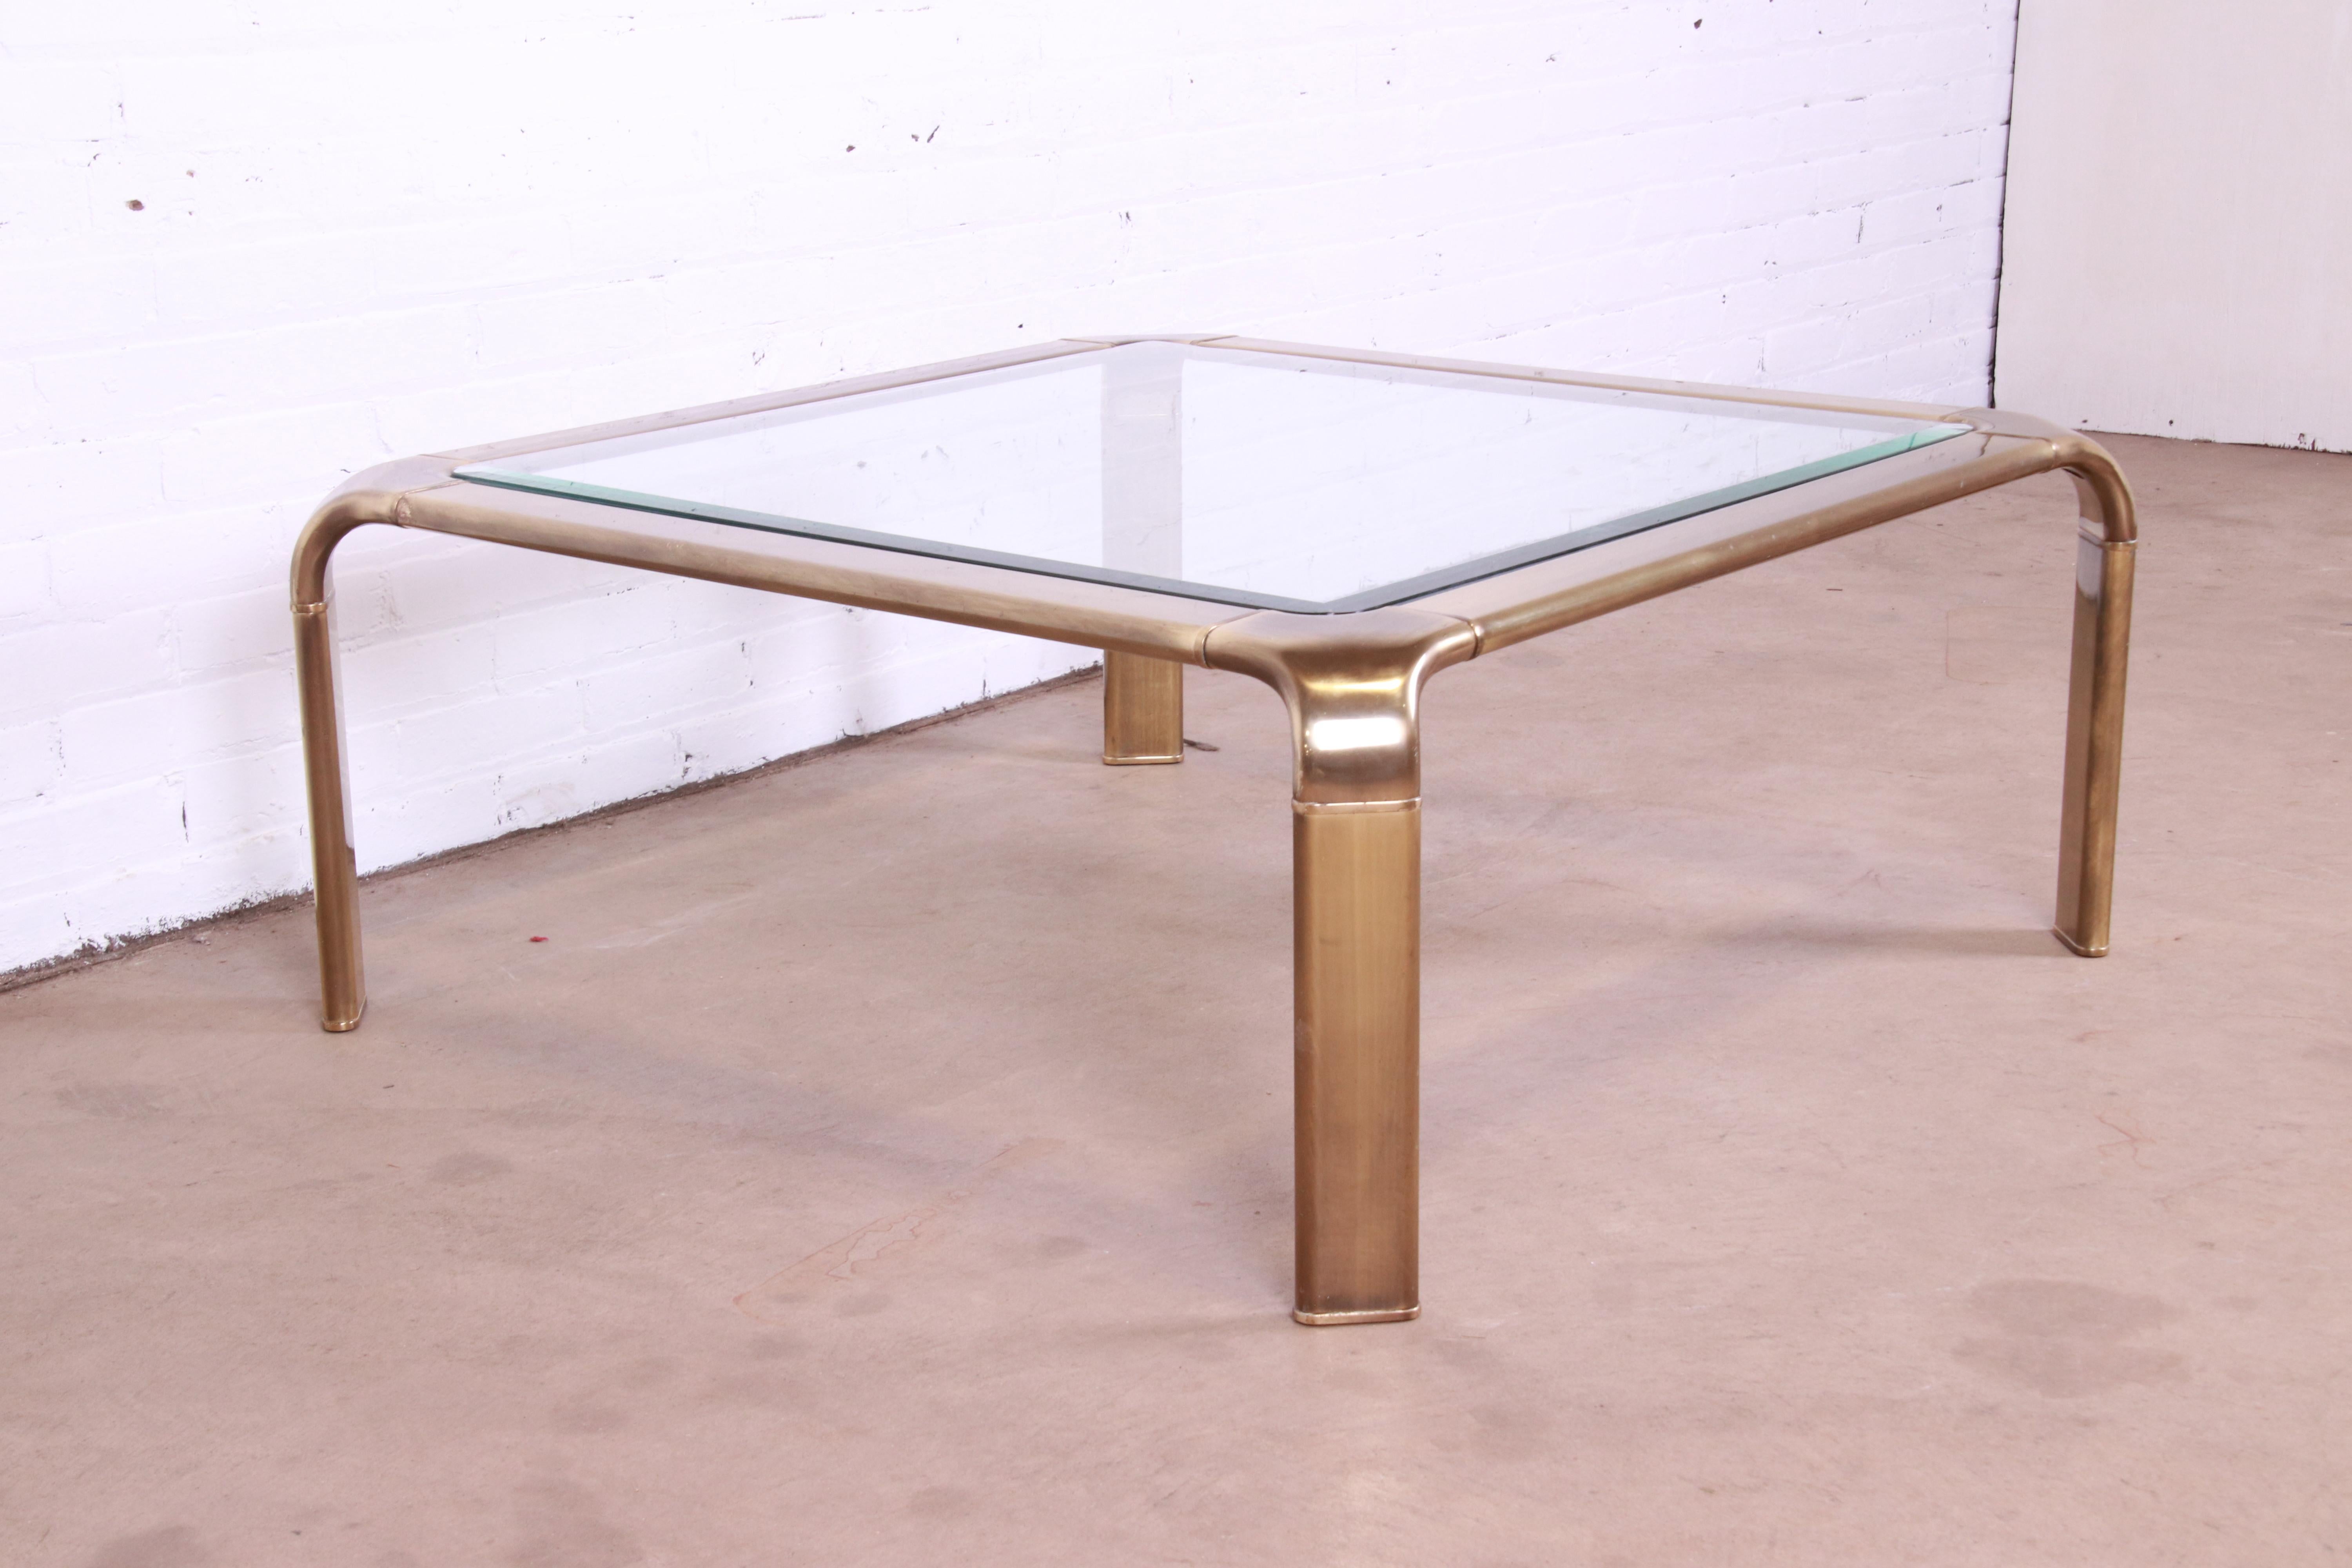 Late 20th Century John Widdicomb Hollywood Regency Brass and Glass Cocktail Table, Circa 1970s For Sale